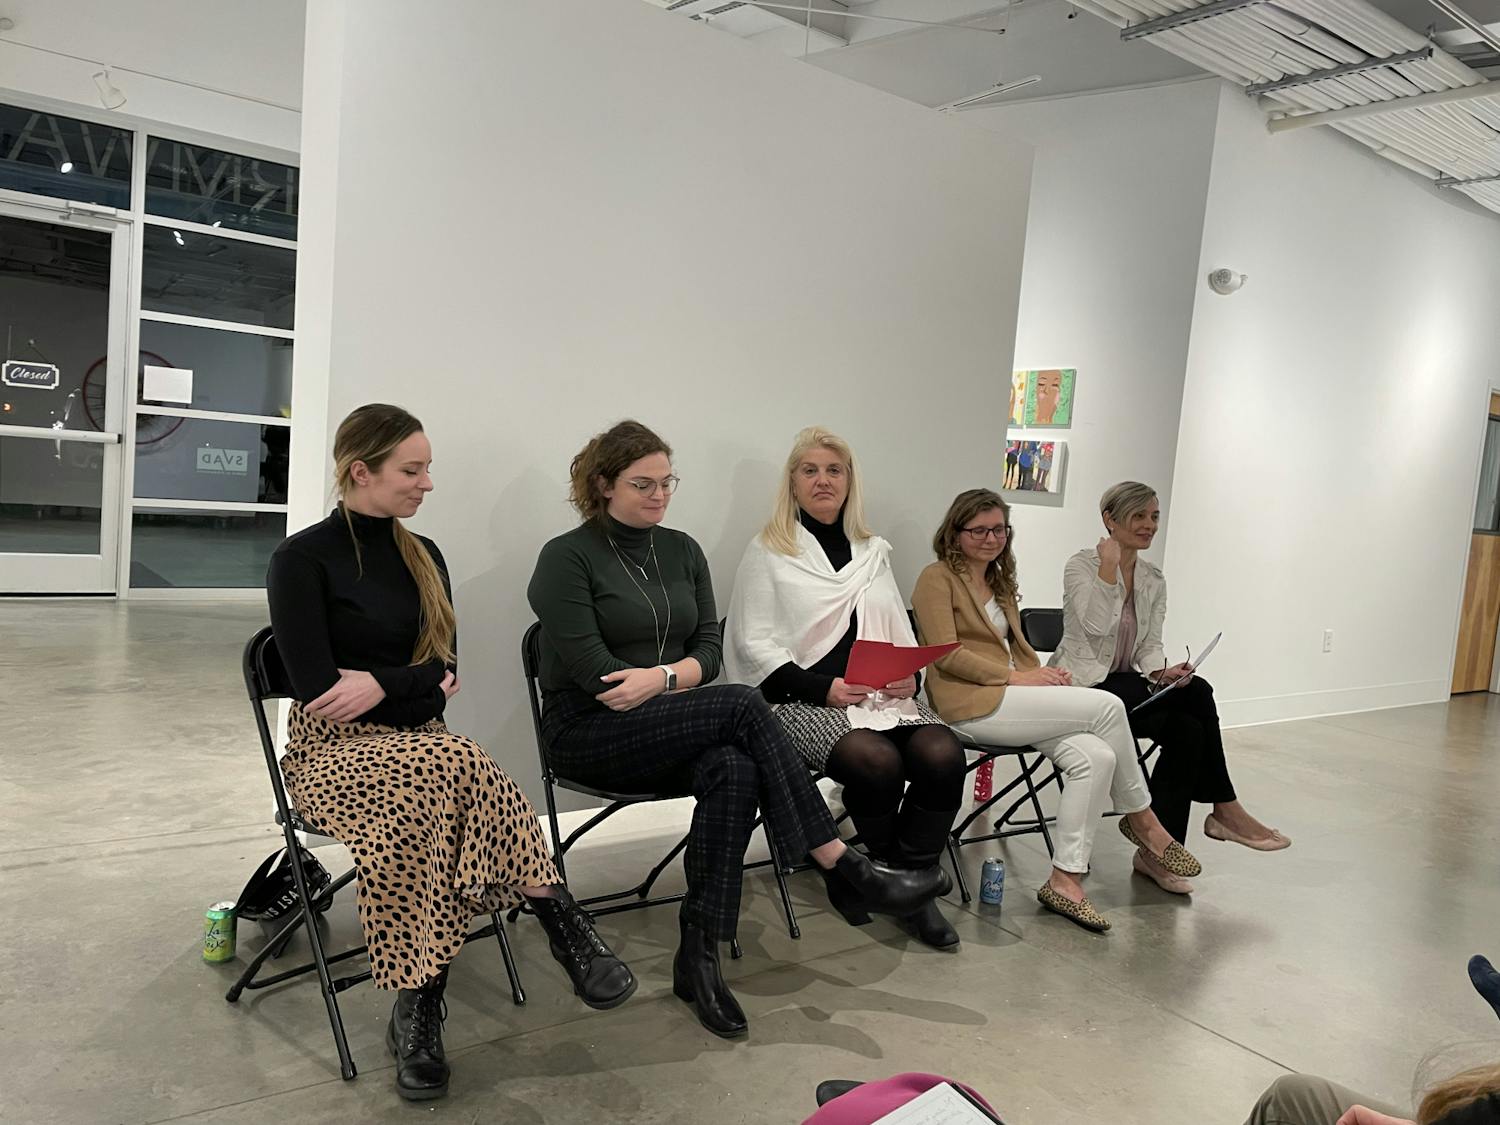 A panel of experts speak at the "Girls Speak" event at Stormwater Studios on Jan. 19, 2023. The event showcased the artwork juvenile offenders.